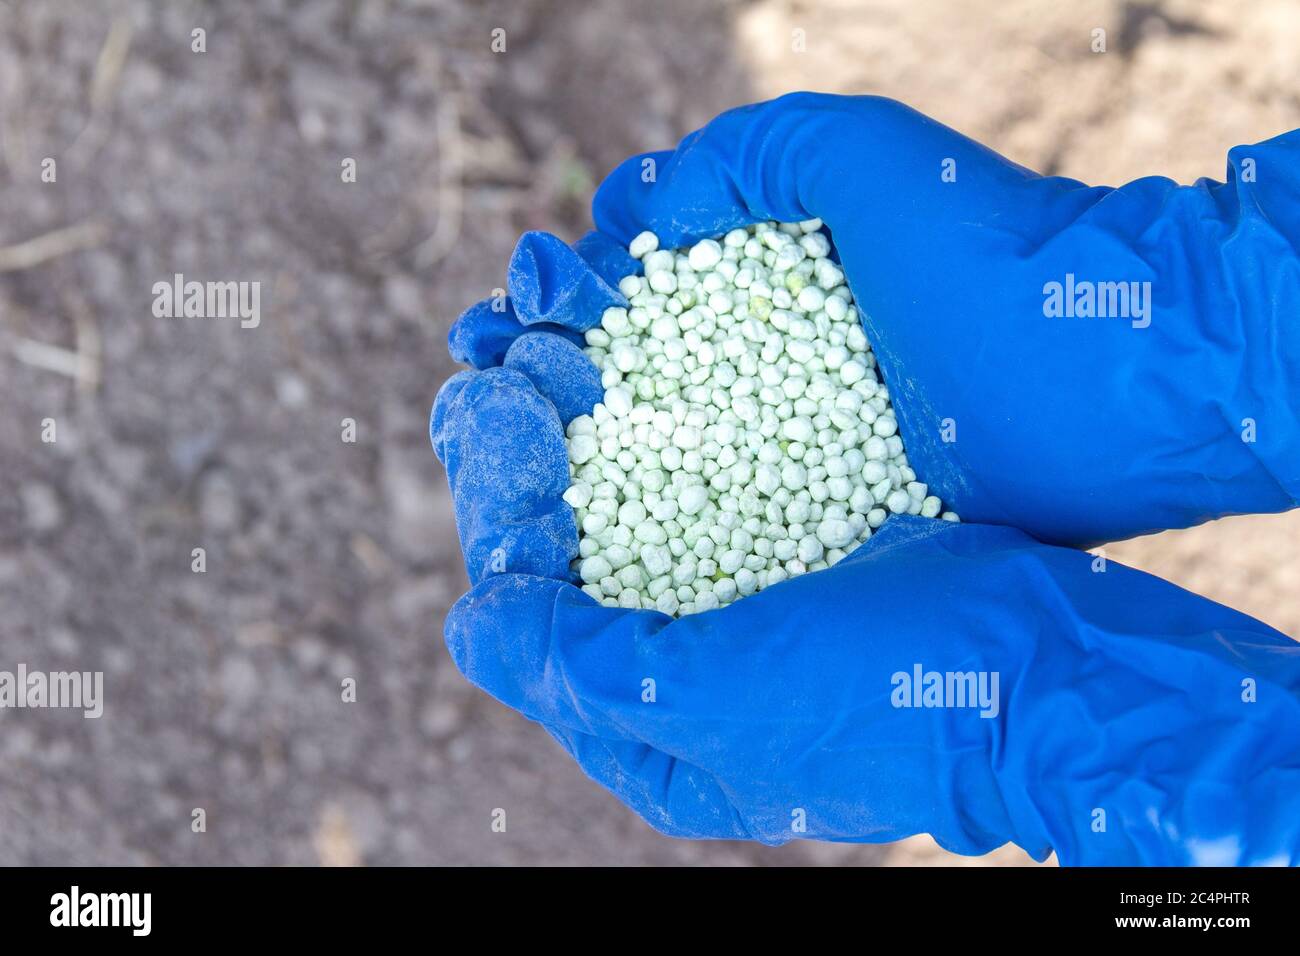 Green different shape chemical fertilizer granules in human's hand. Stock Photo